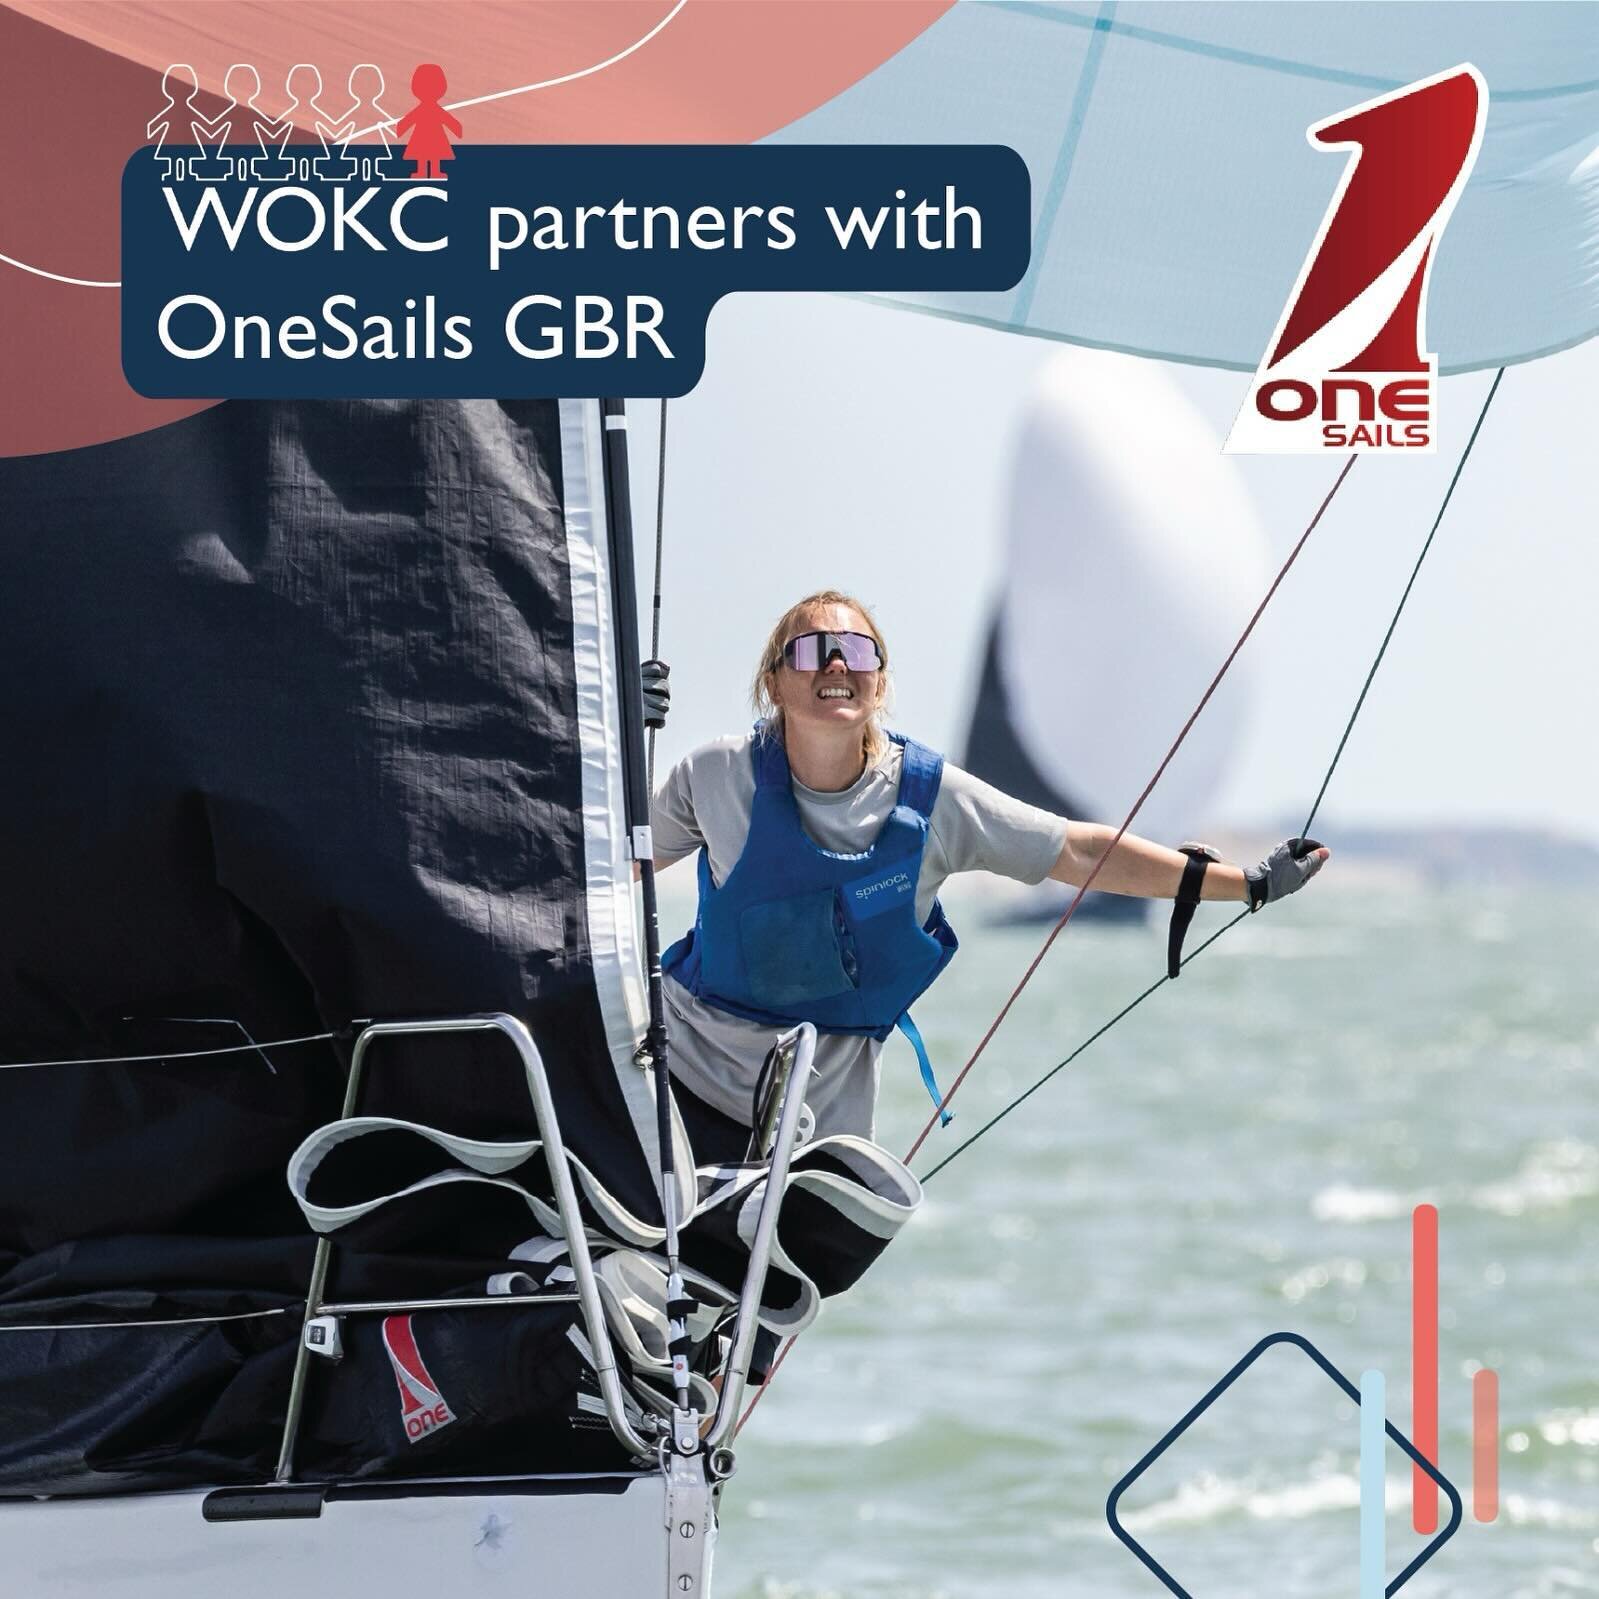 Women&rsquo;s Open Keelboat Championship announces OneSails GBR as Development Partner for 2024!

Today the Women&rsquo;s Open Keelboat Championship (WOKC) proudly announces the beginning of a prosperous new partnership with OneSails GBR, the leading